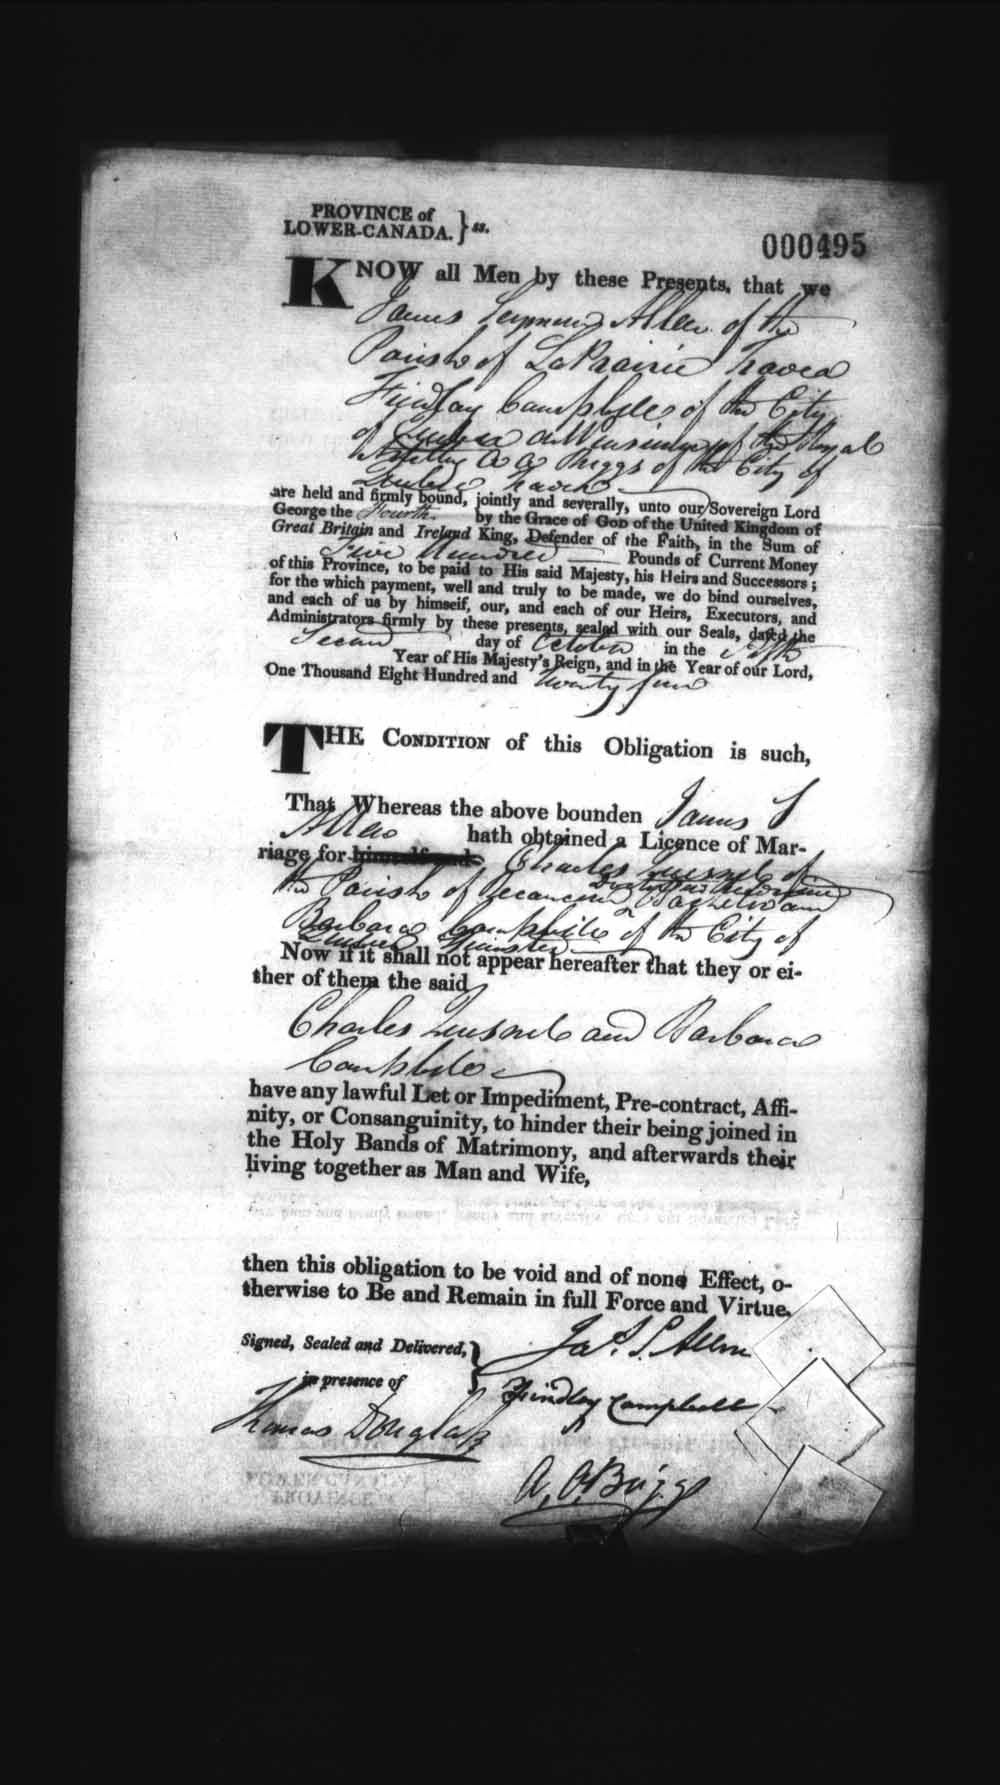 Digitized page of Upper and Lower Canada Marriage Bonds (1779-1865) for Image No.: e008236408